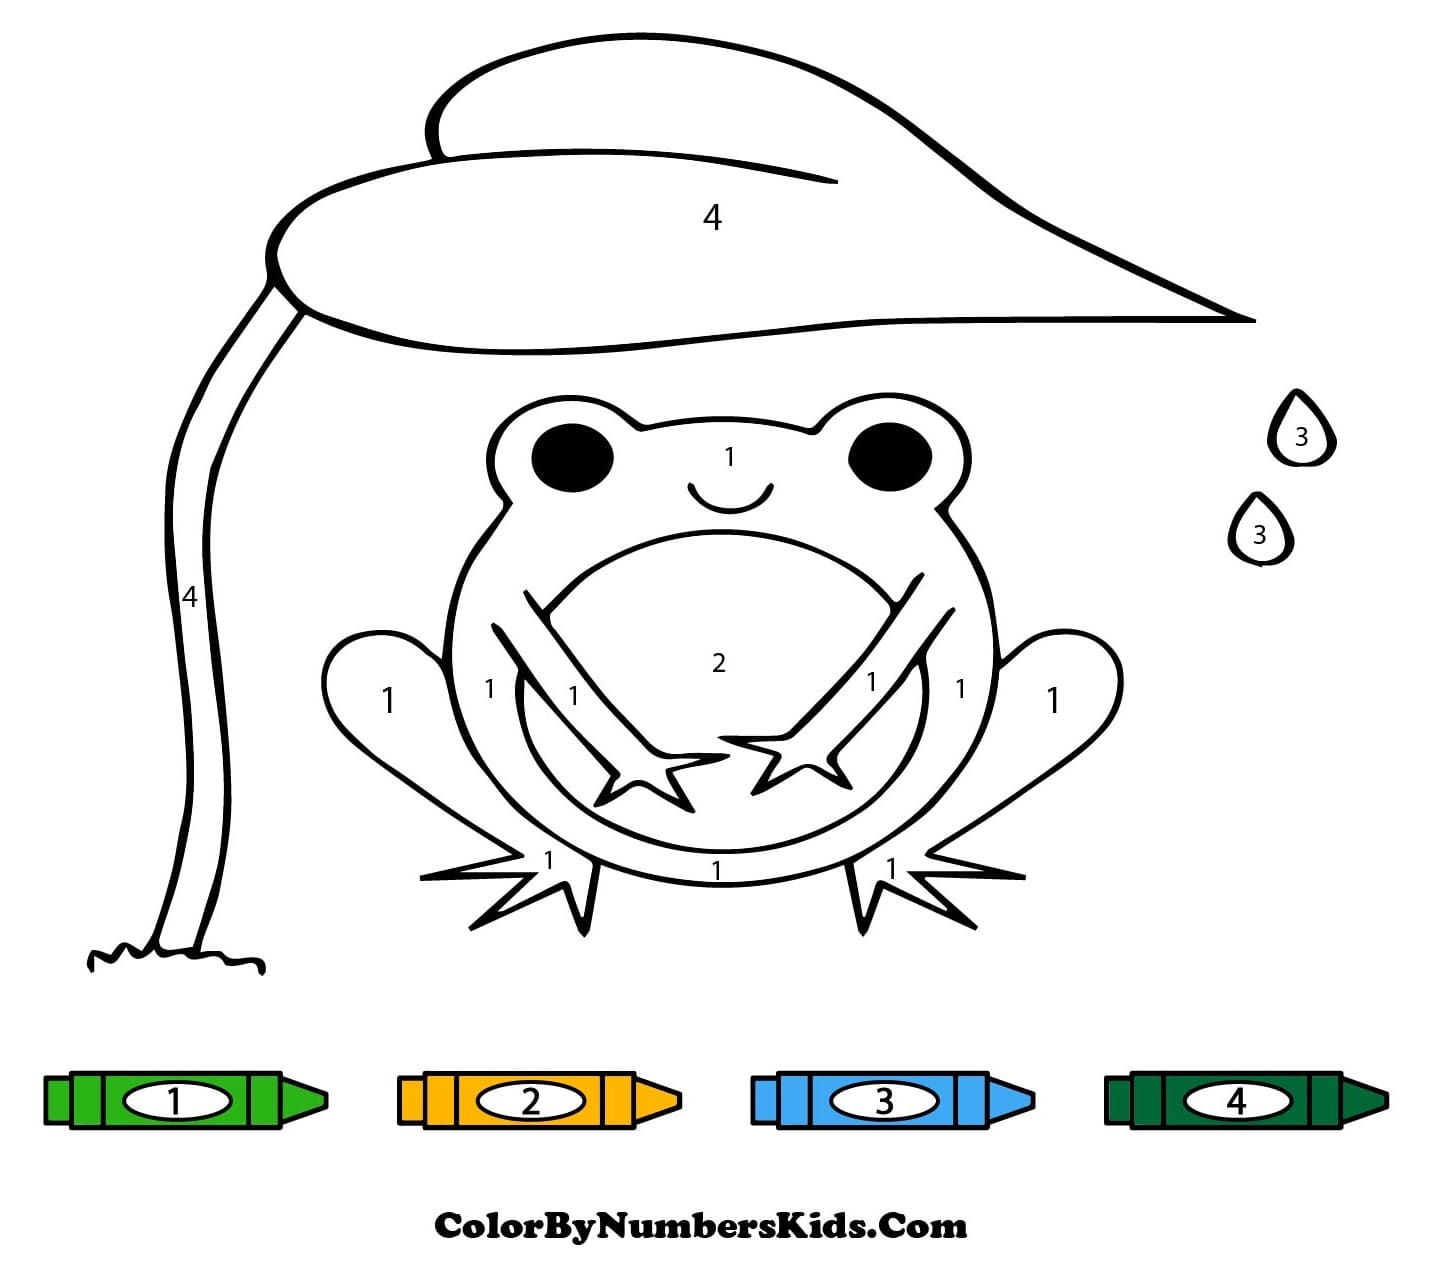 Printable Frog Color By Number For Kids